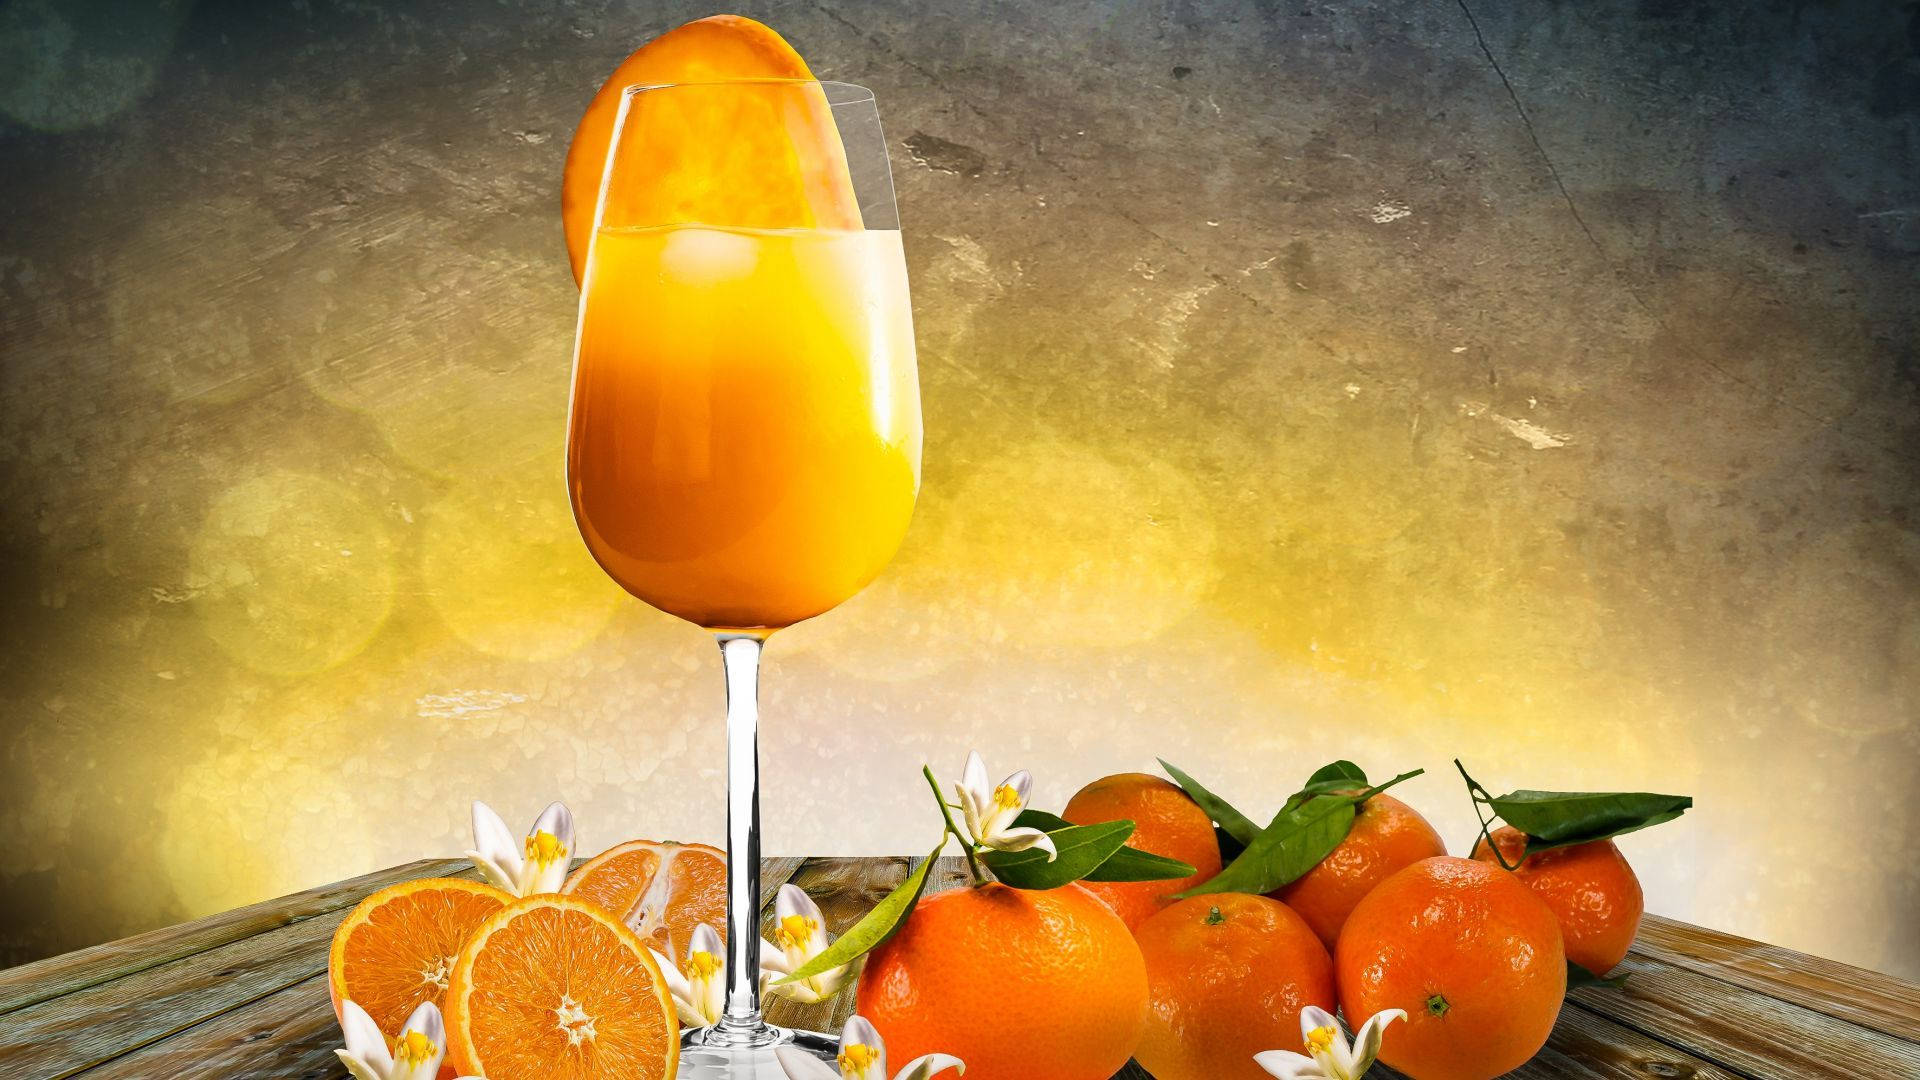 Orange Fruit In A Glass Background